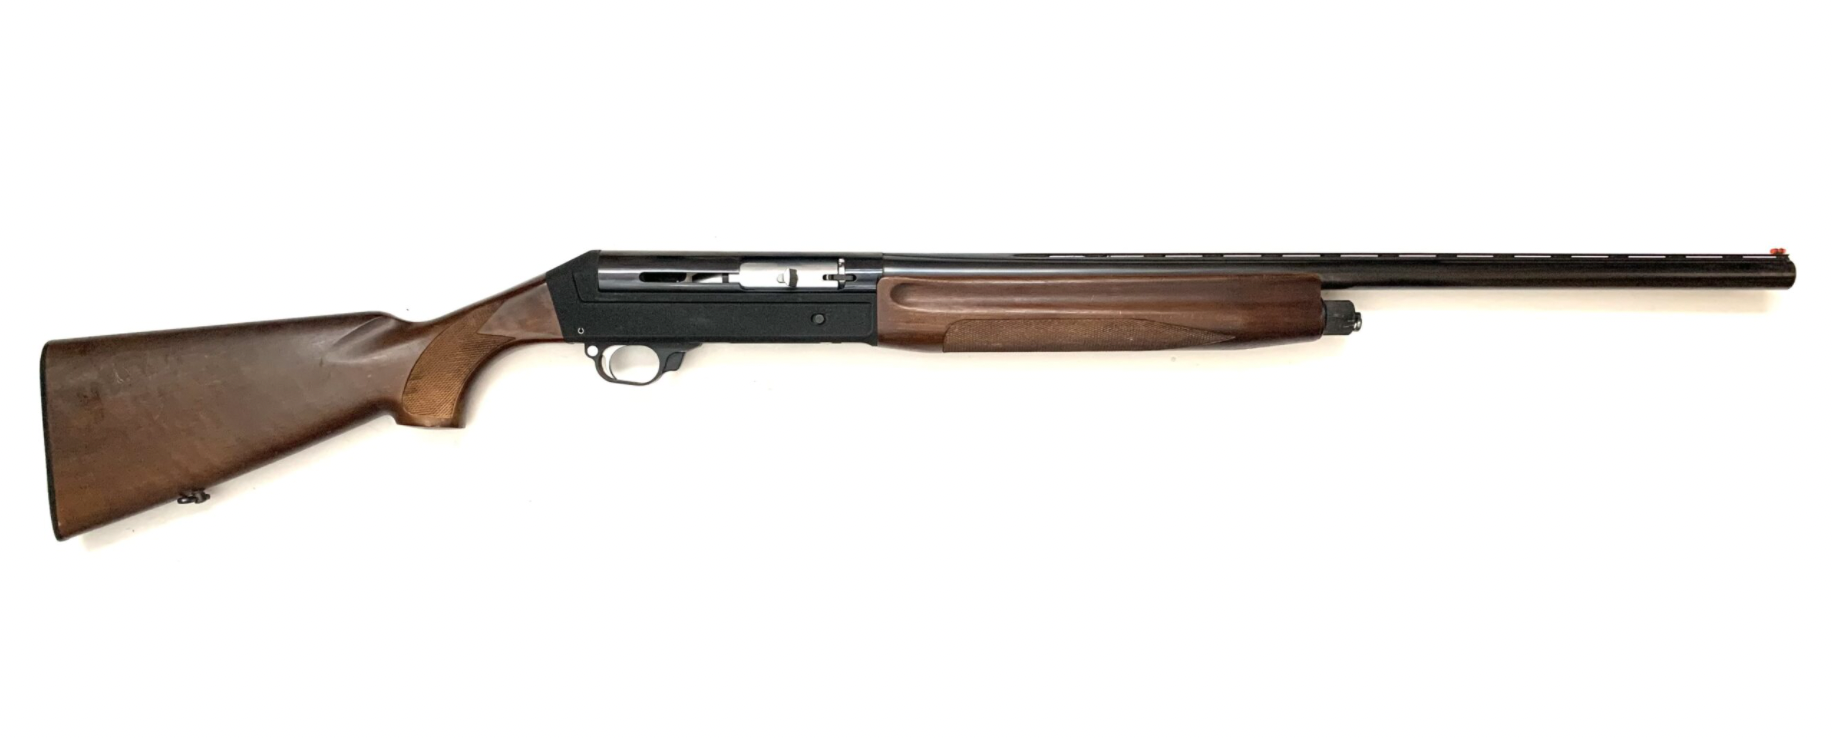 the first Benelli in the U.S.